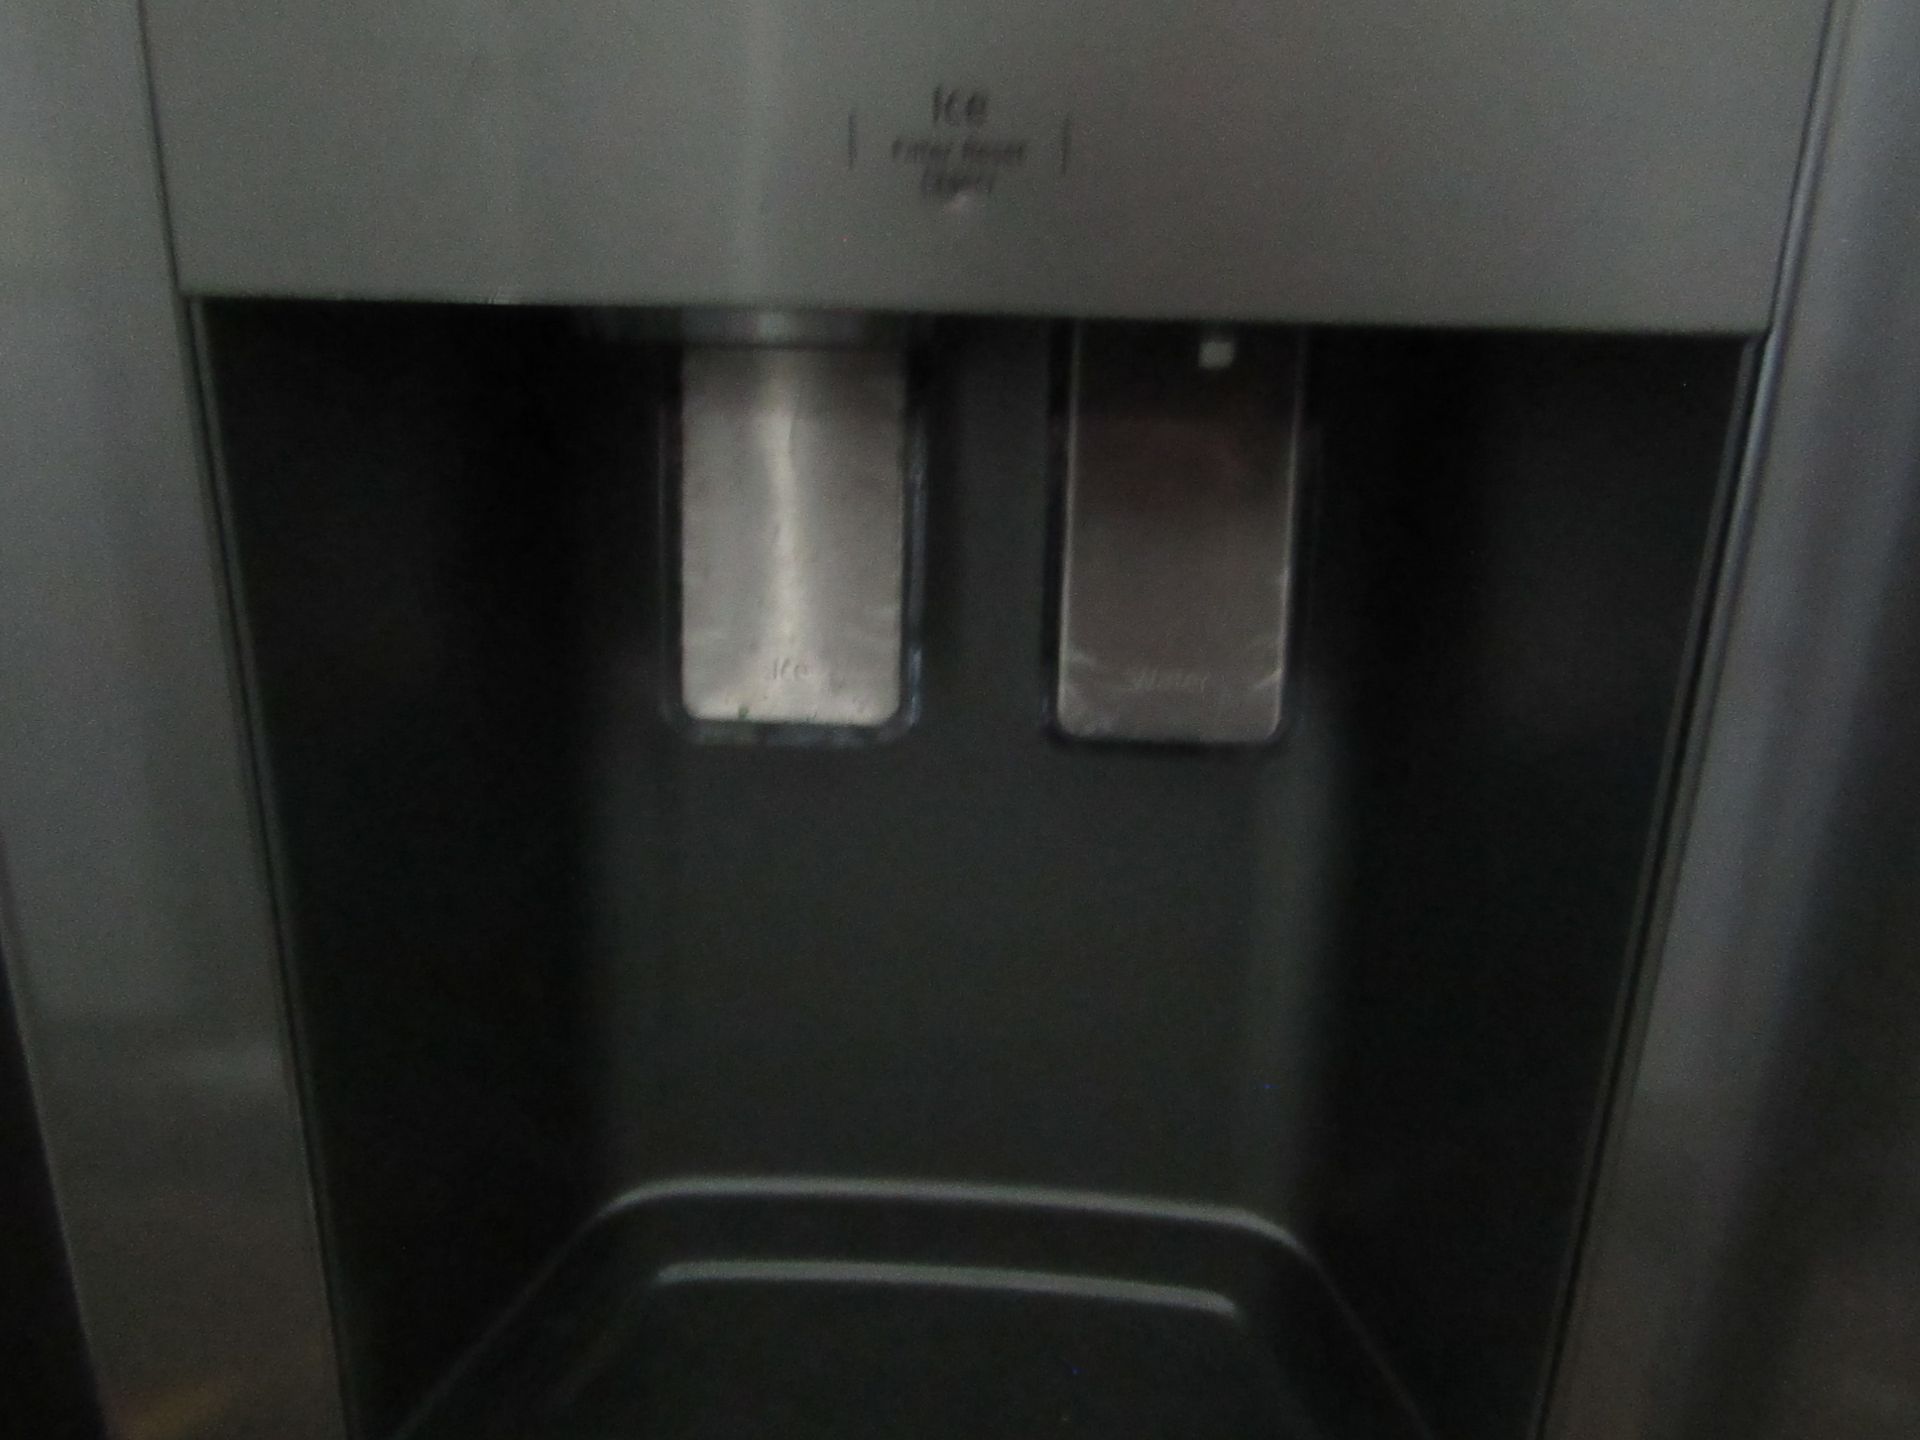 Samsung RS50N3513S8 American style fridge freezer, tested working for coldness but the water - Image 2 of 4